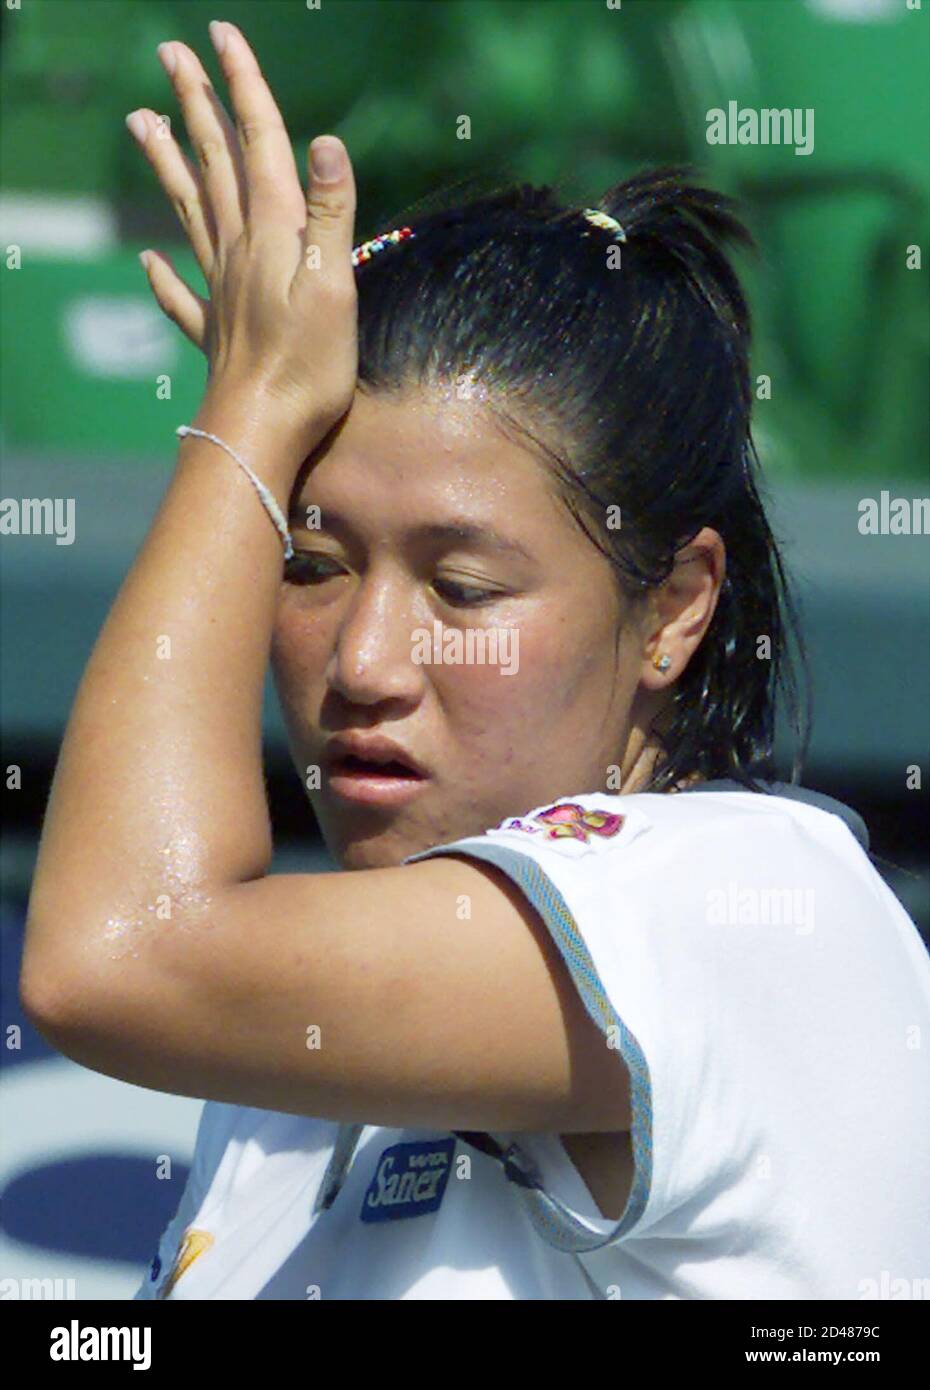 Thailand's Tamarine Tanasugarn wipes her sweat after missing a shot against  Julie Halard-Decugis of France during the women's singles semi-final match  of the Japan Open tennis tournament at Ariake Colosseum in Tokyo